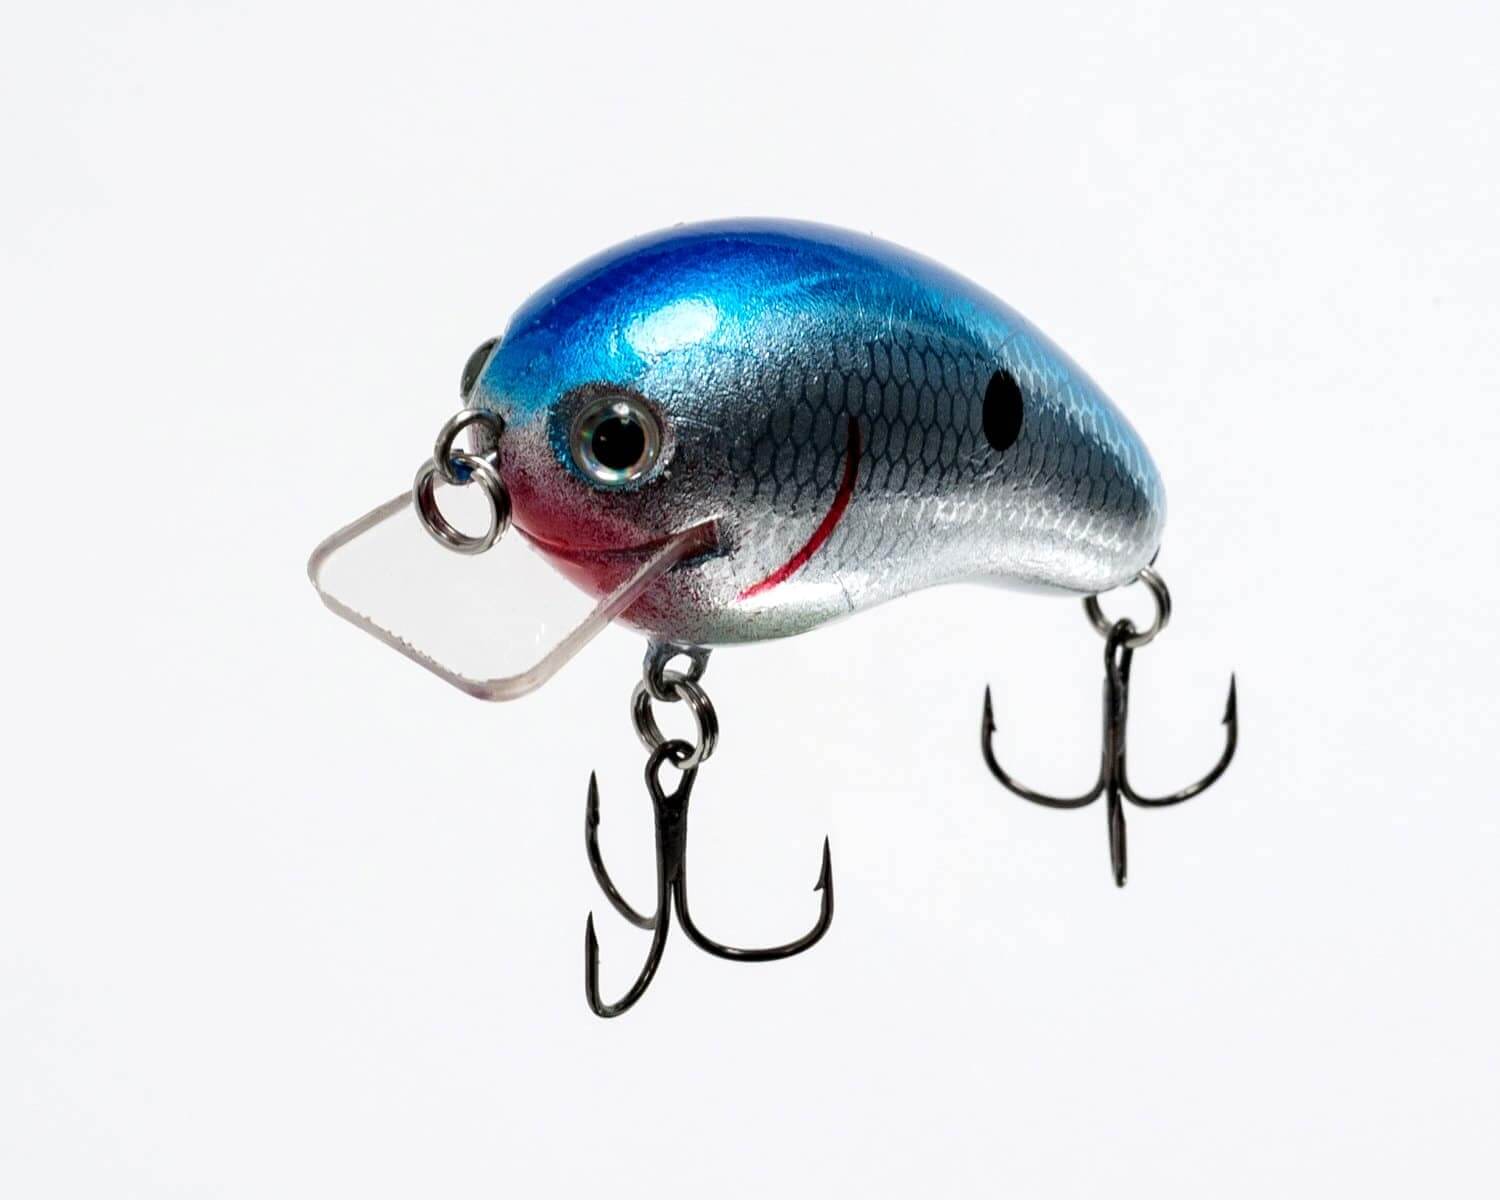 Master Crankbait Fishing with Expert Tips!